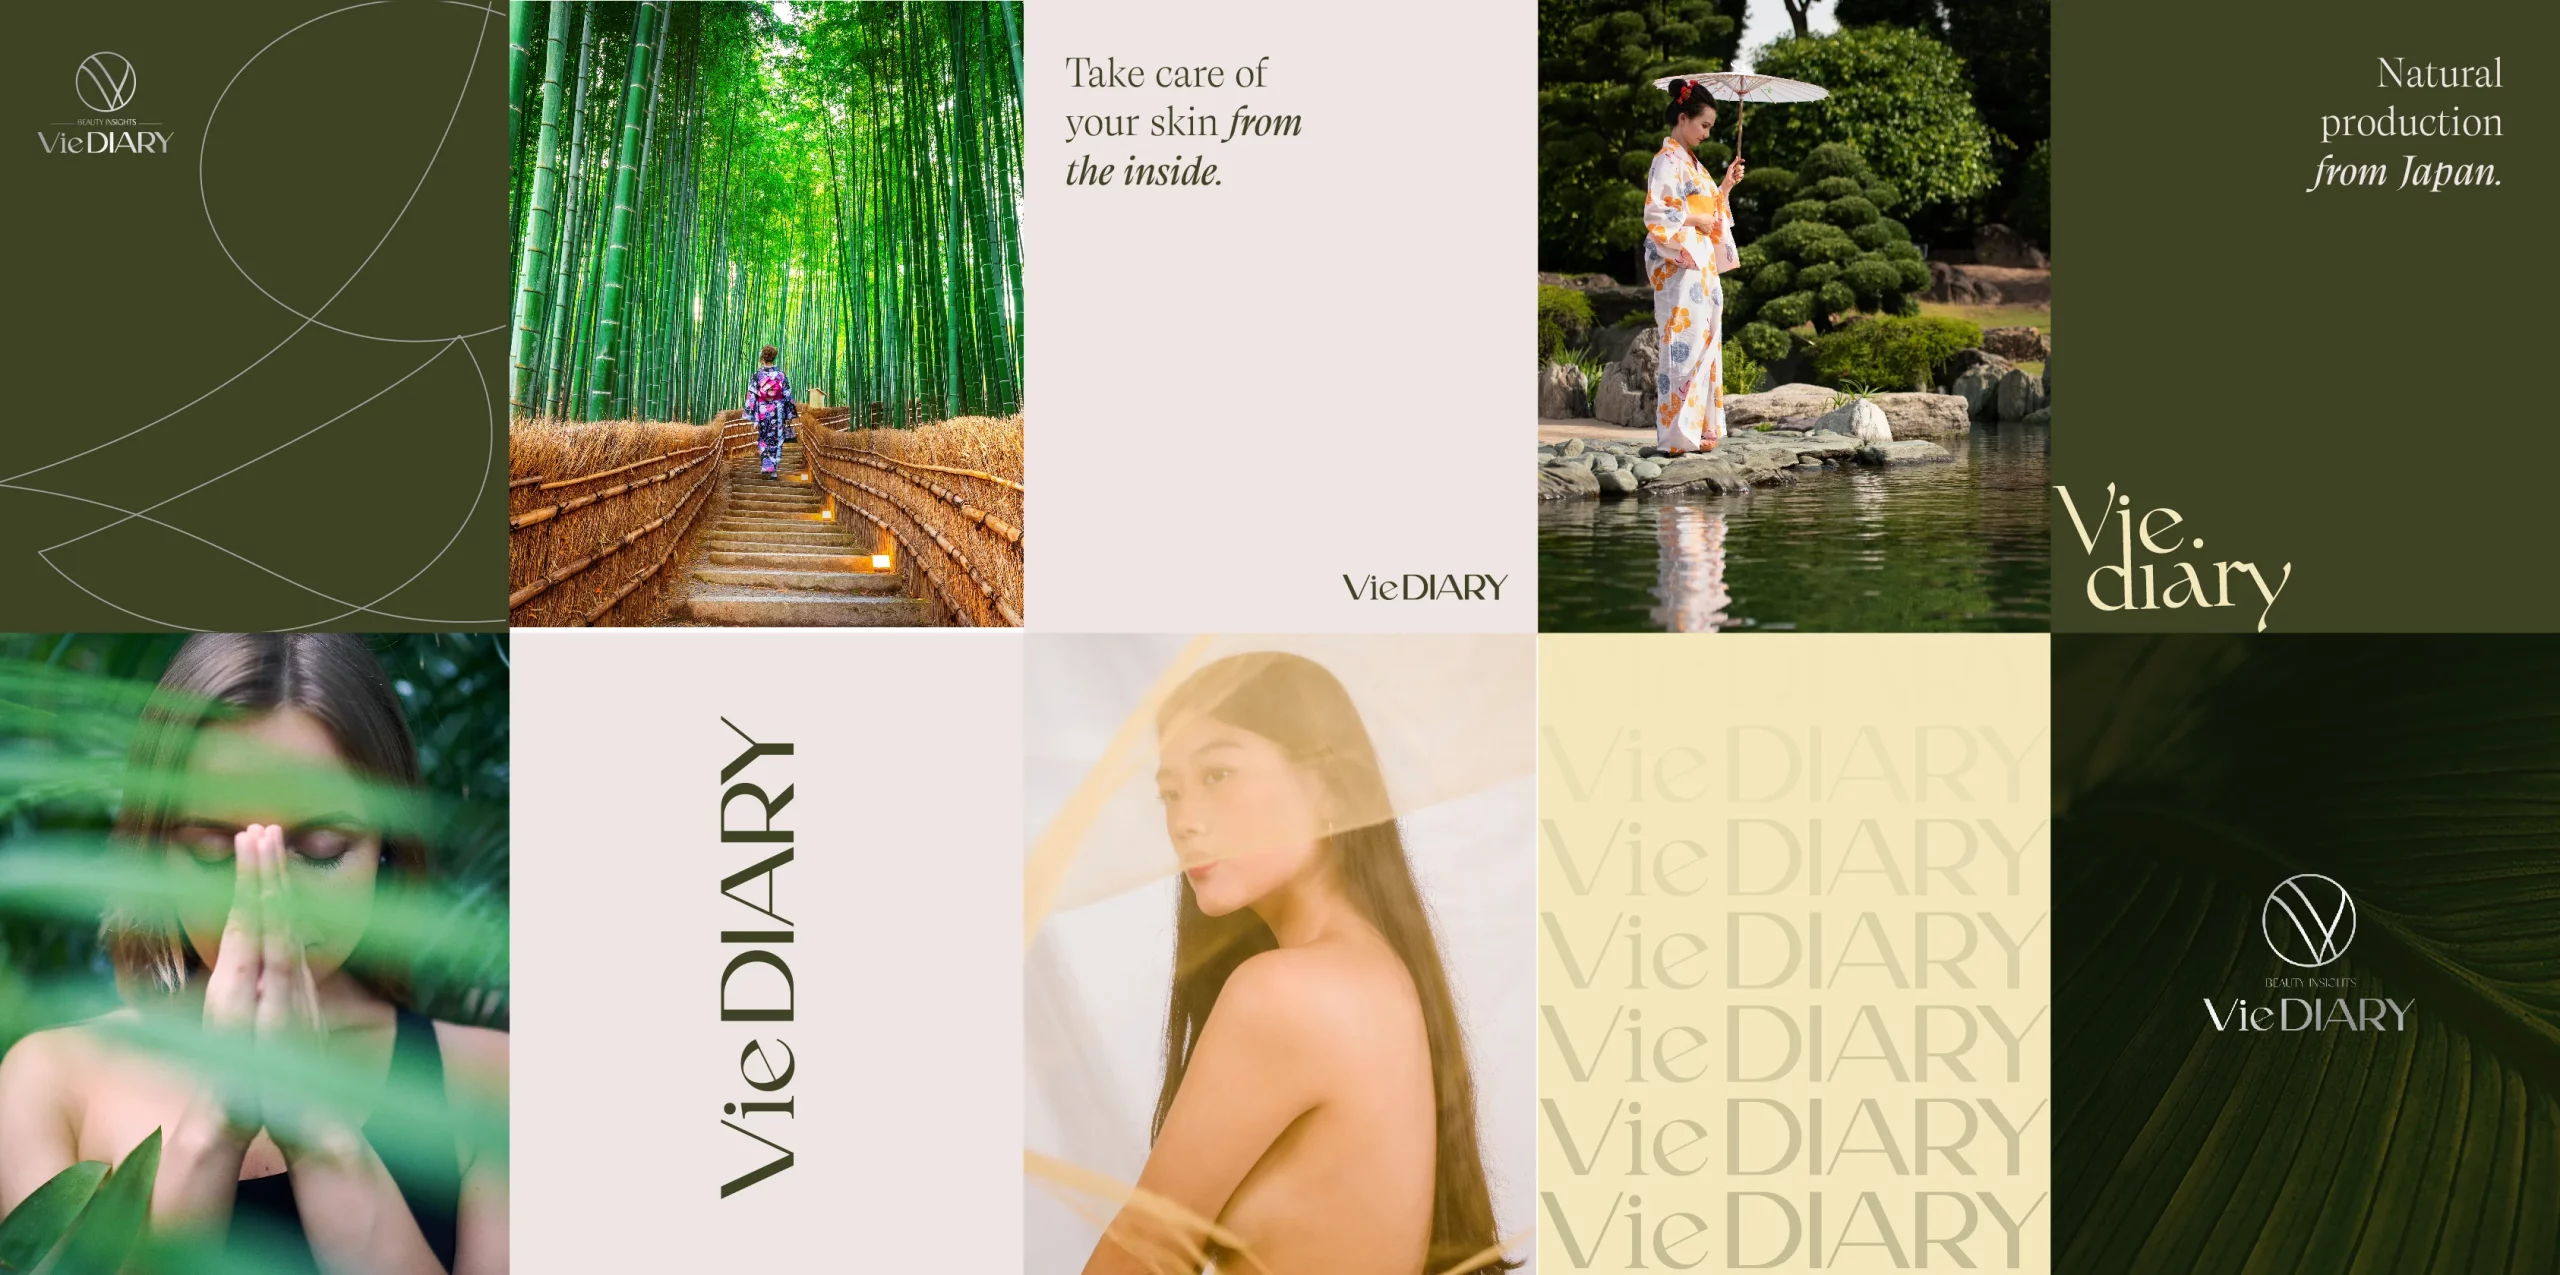 VieDiary Brand Guidelines 24 24 malu scaled